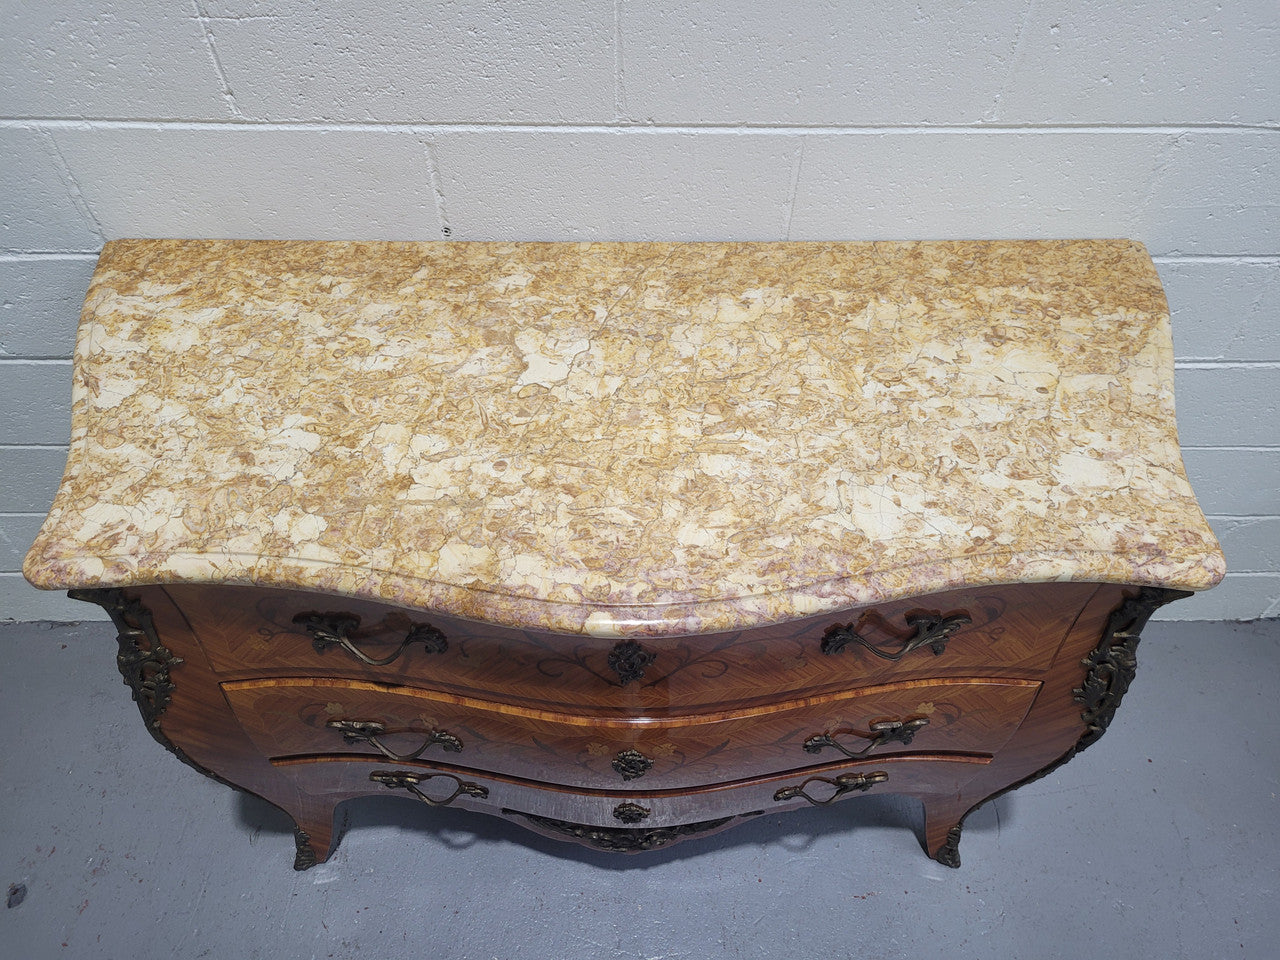 French three drawer marquetry inlaid marble top commode with decorative ormolu mounts. In good original detailed condition.